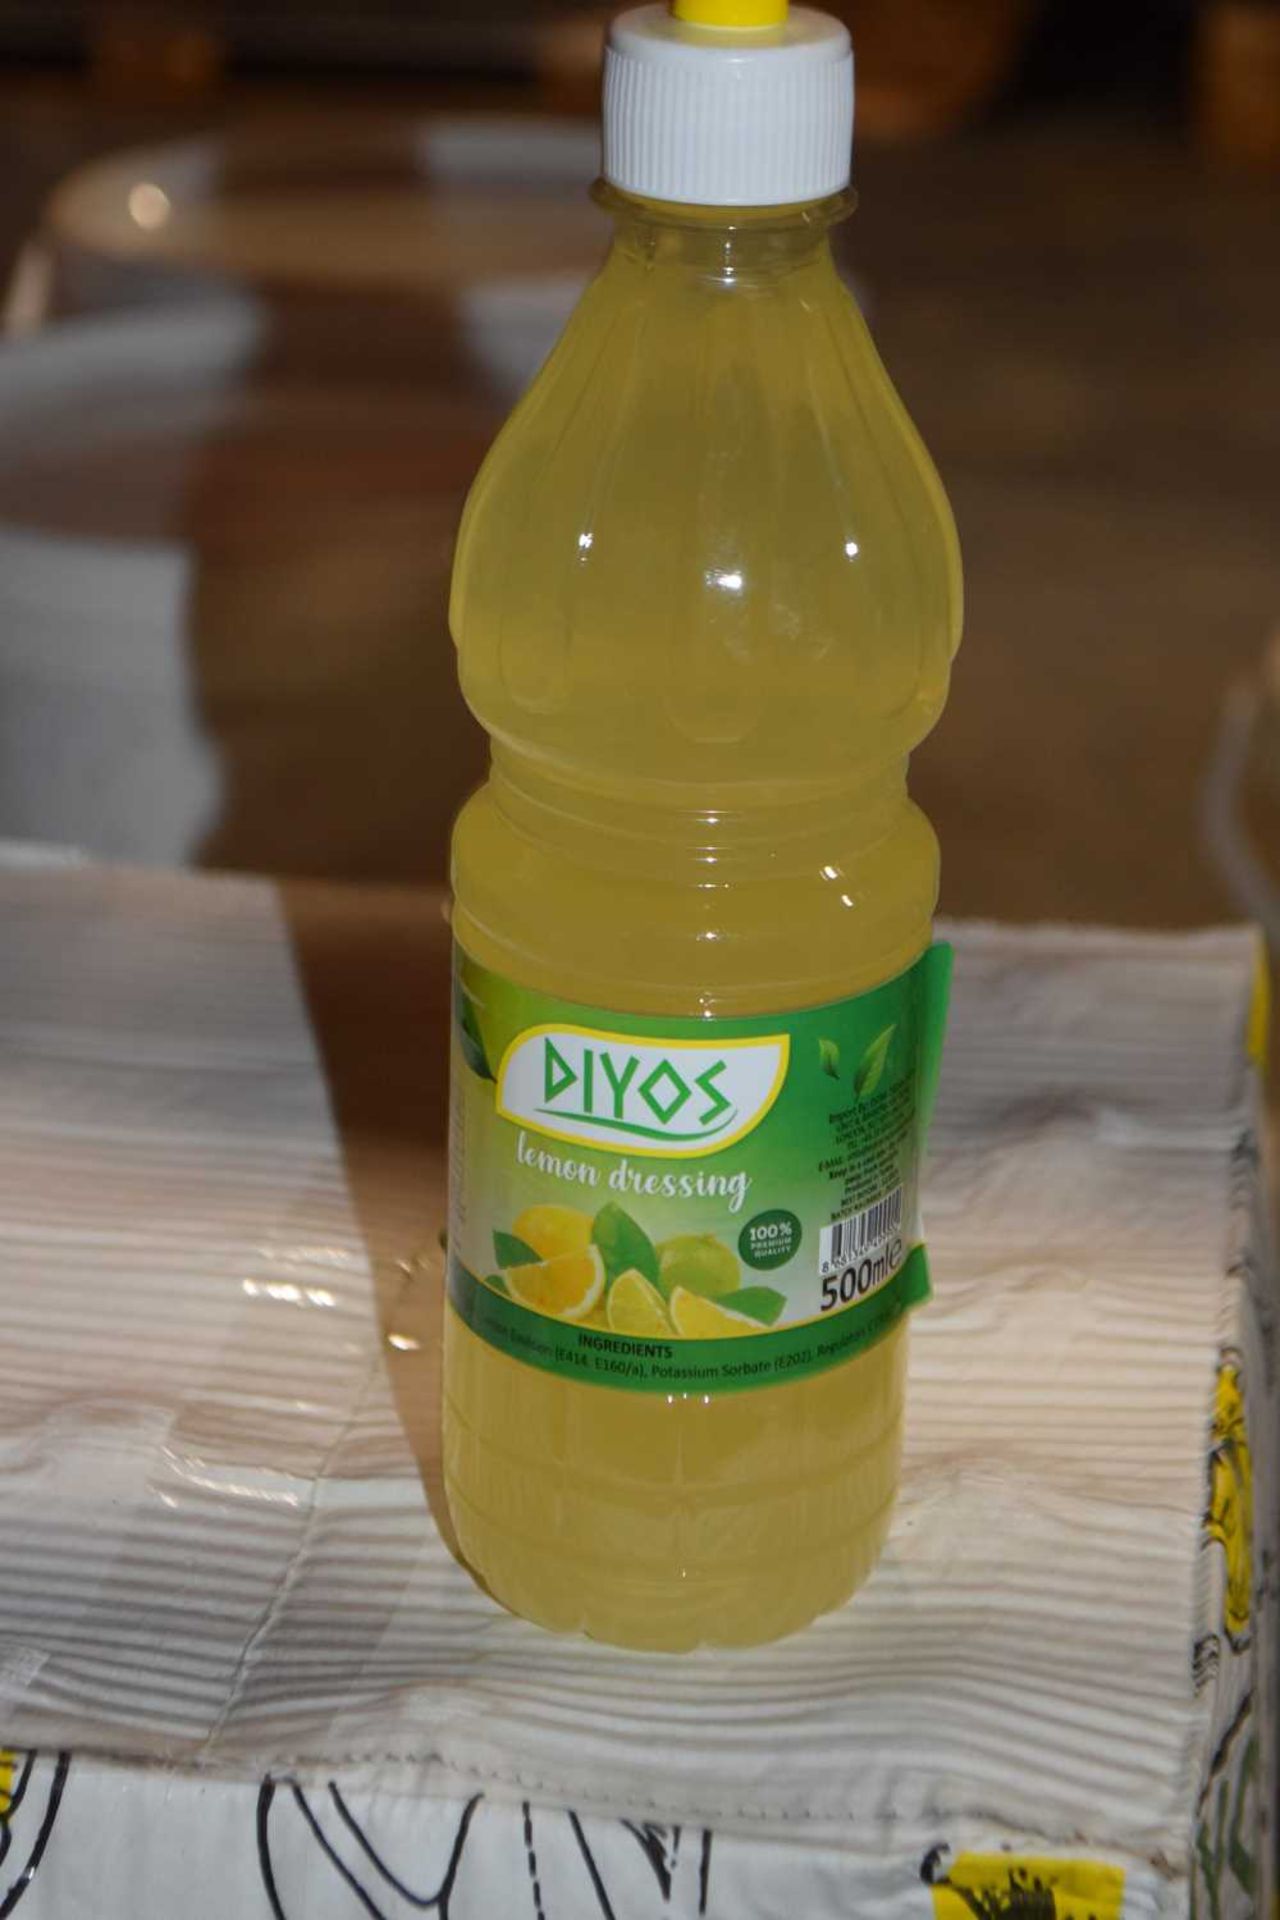 Three boxes of Diyos Lemon Dressing, each box containing 20 pieces of 500ml bottles - Image 2 of 2